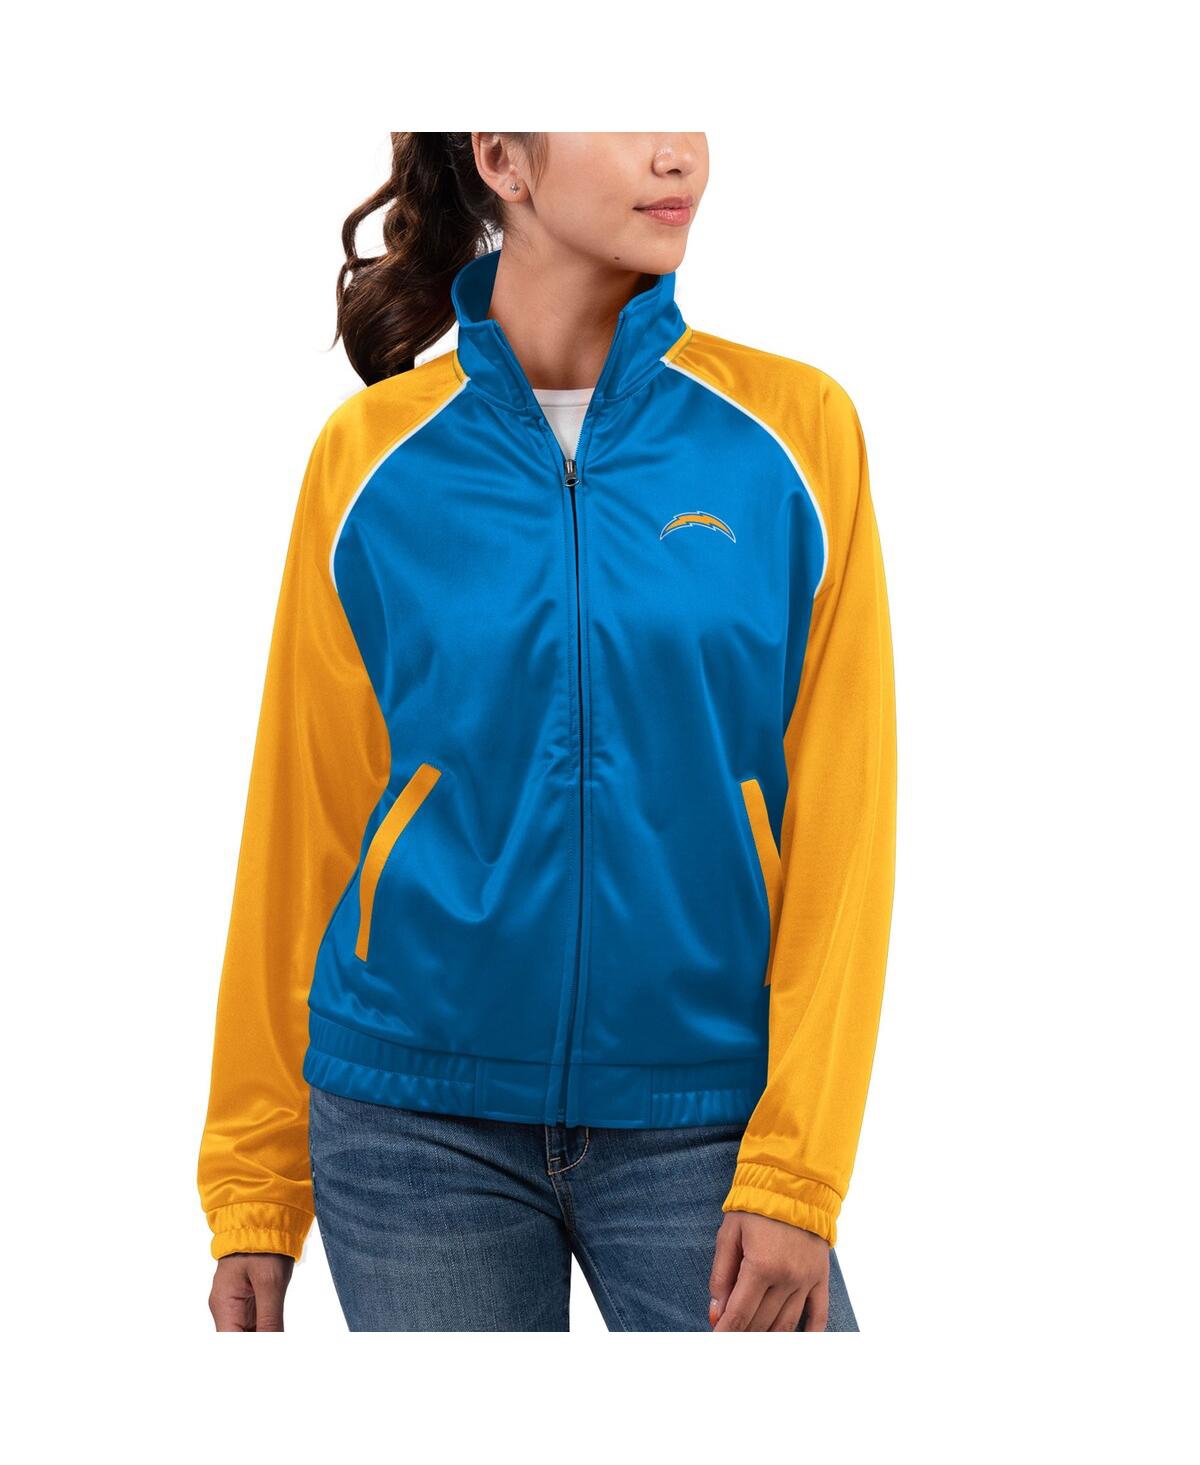 Women's G-iii 4Her by Carl Banks Powder Blue Los Angeles Chargers Showup Fashion Dolman Full-Zip Track Jacket - Powder Blue